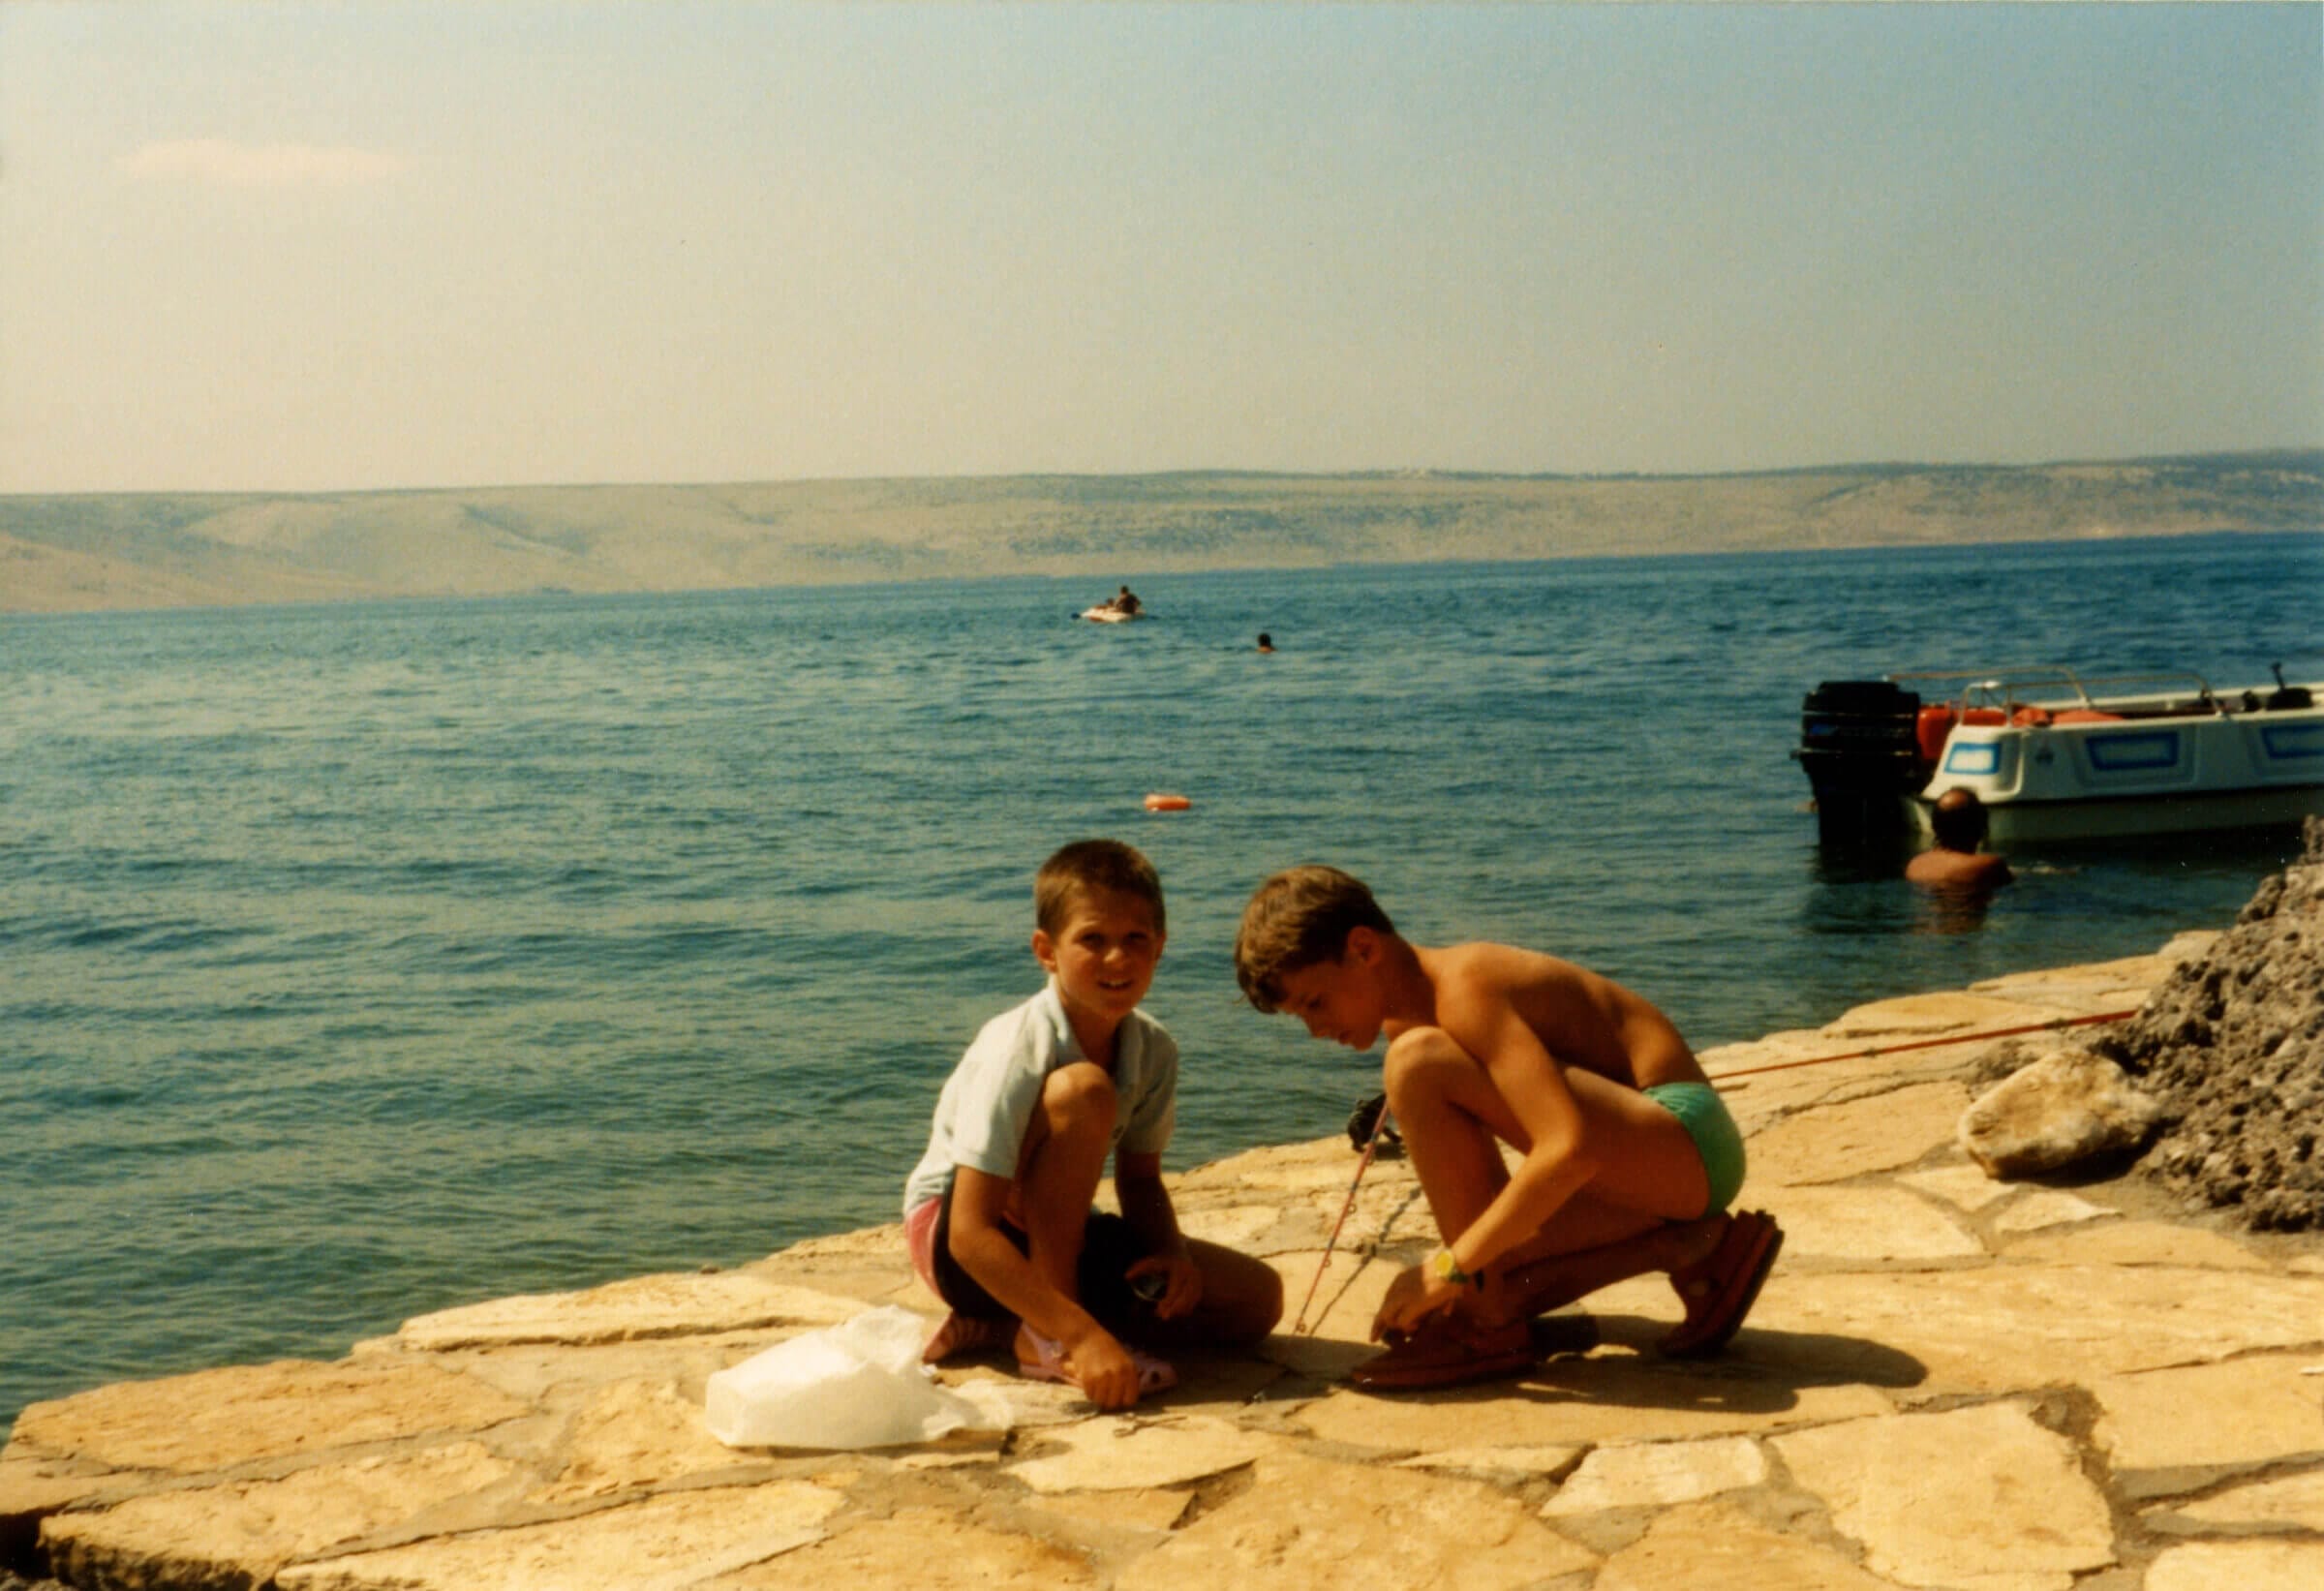 During our summer vacation in Croatia, I must have been the only kid wearing a shirt on the beach.